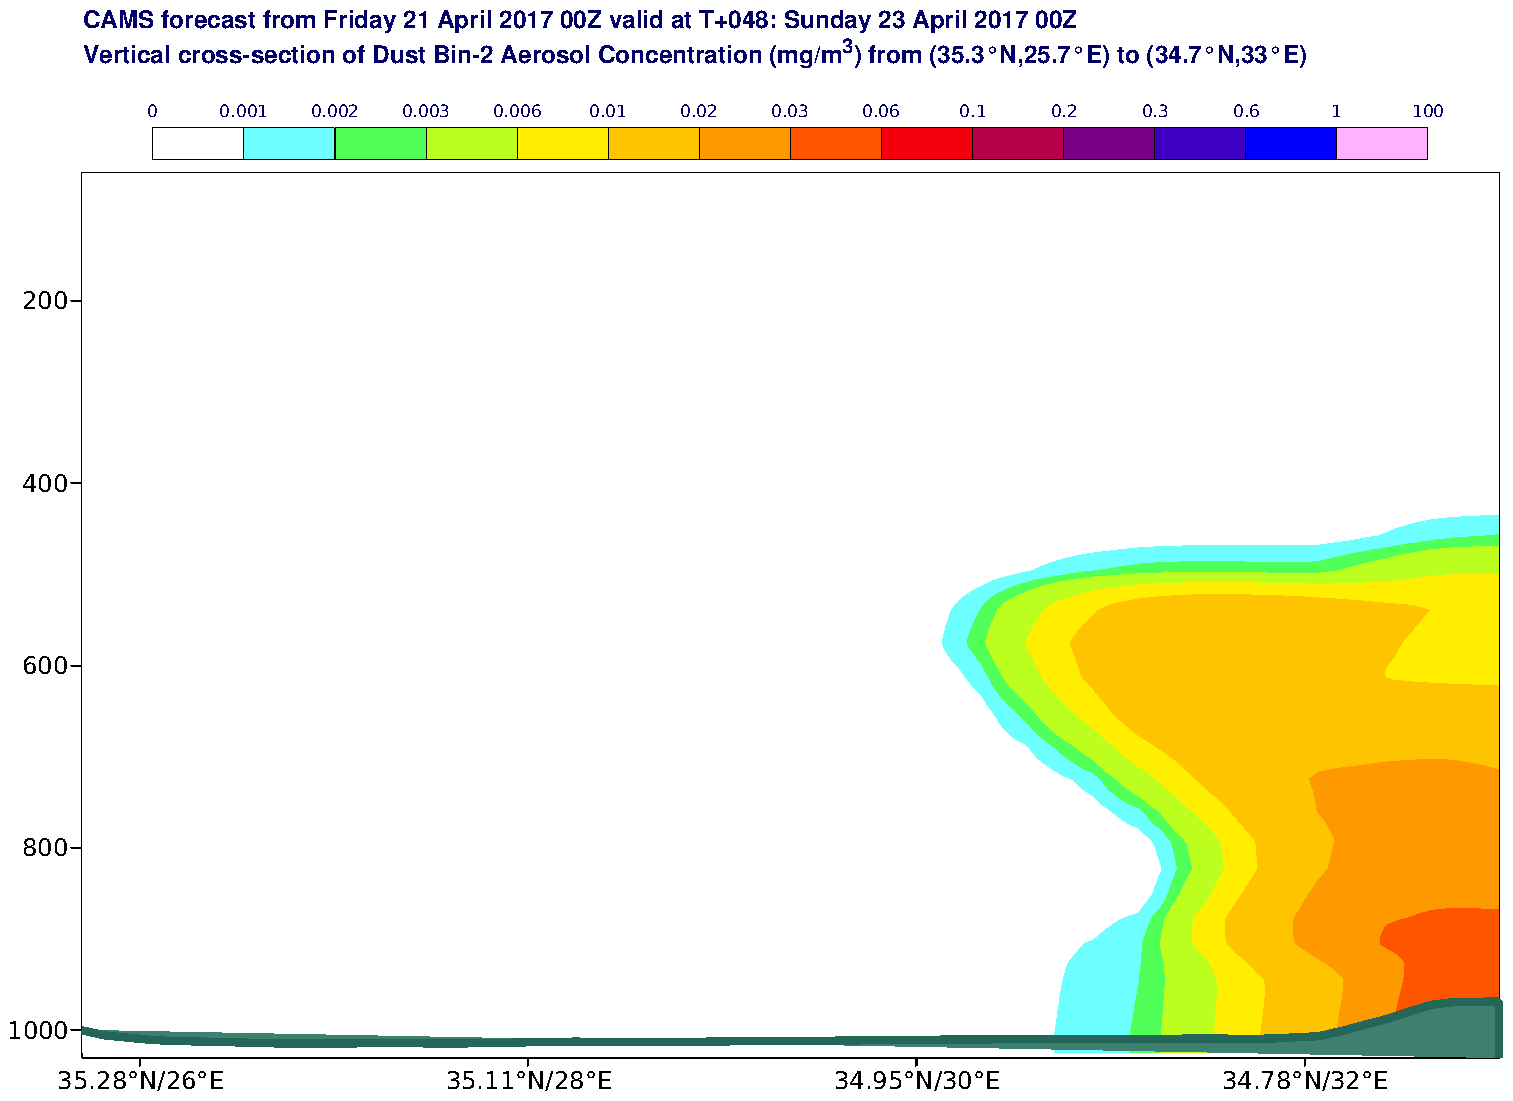 Vertical cross-section of Dust Bin-2 Aerosol Concentration (mg/m3) valid at T48 - 2017-04-23 00:00